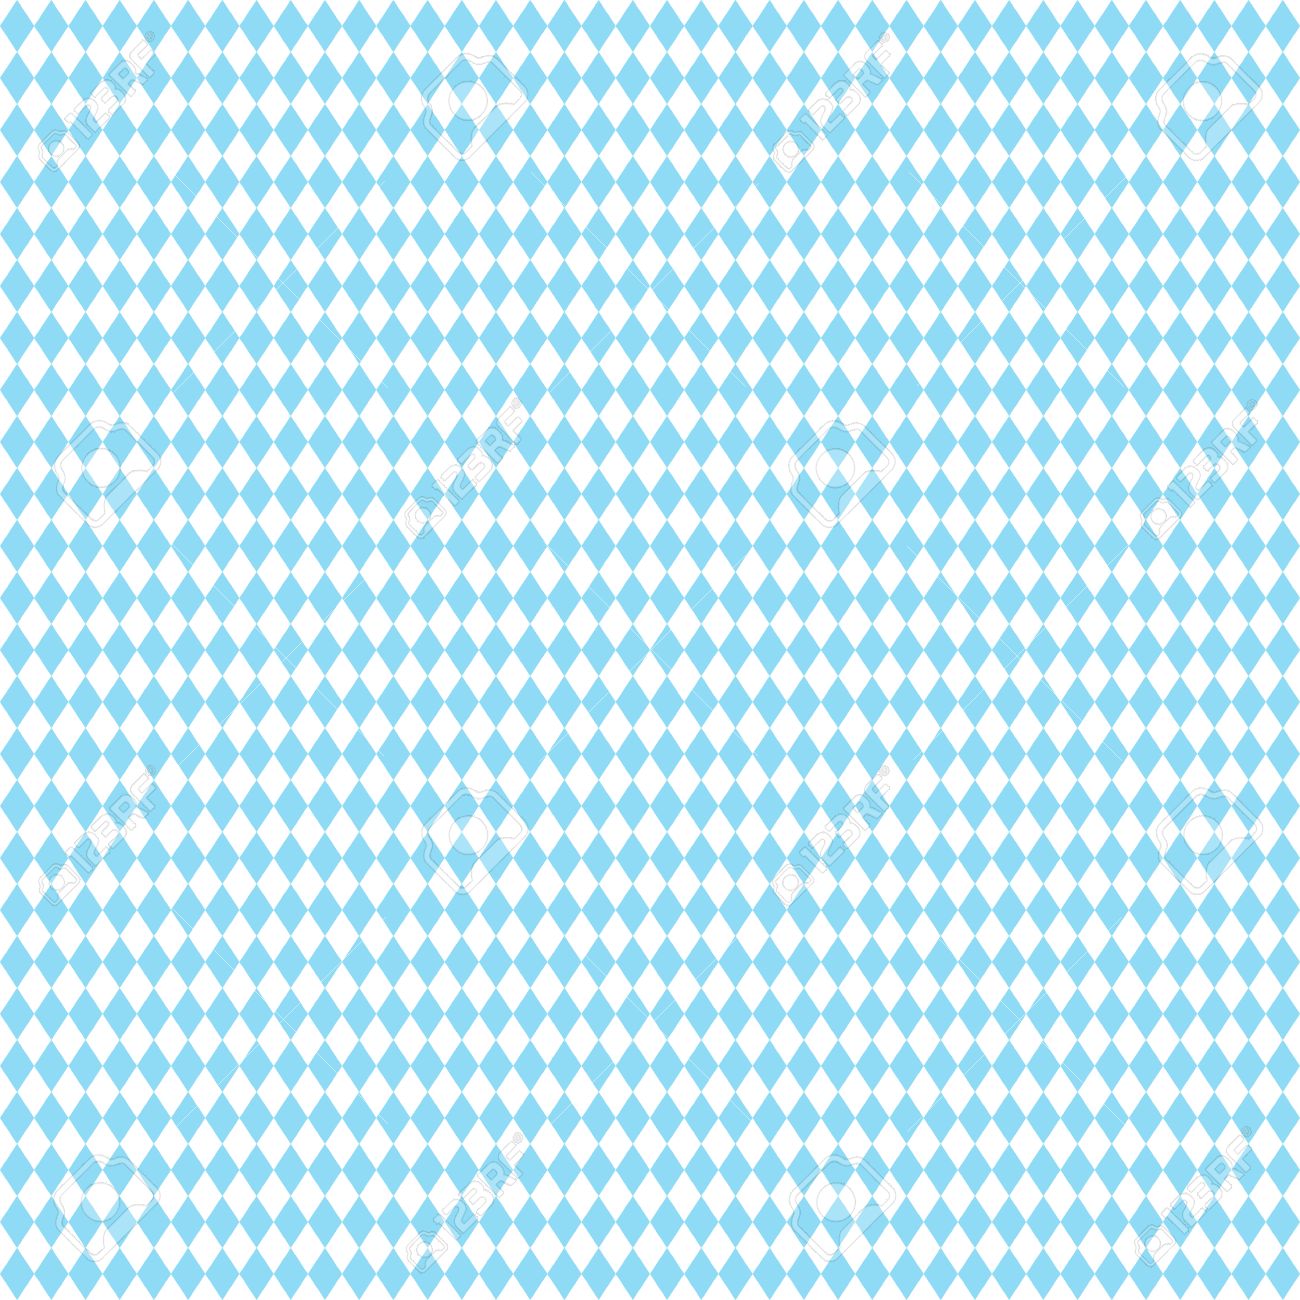 Free download Oktoberfest Background With Seamless Blue White Checkered ...